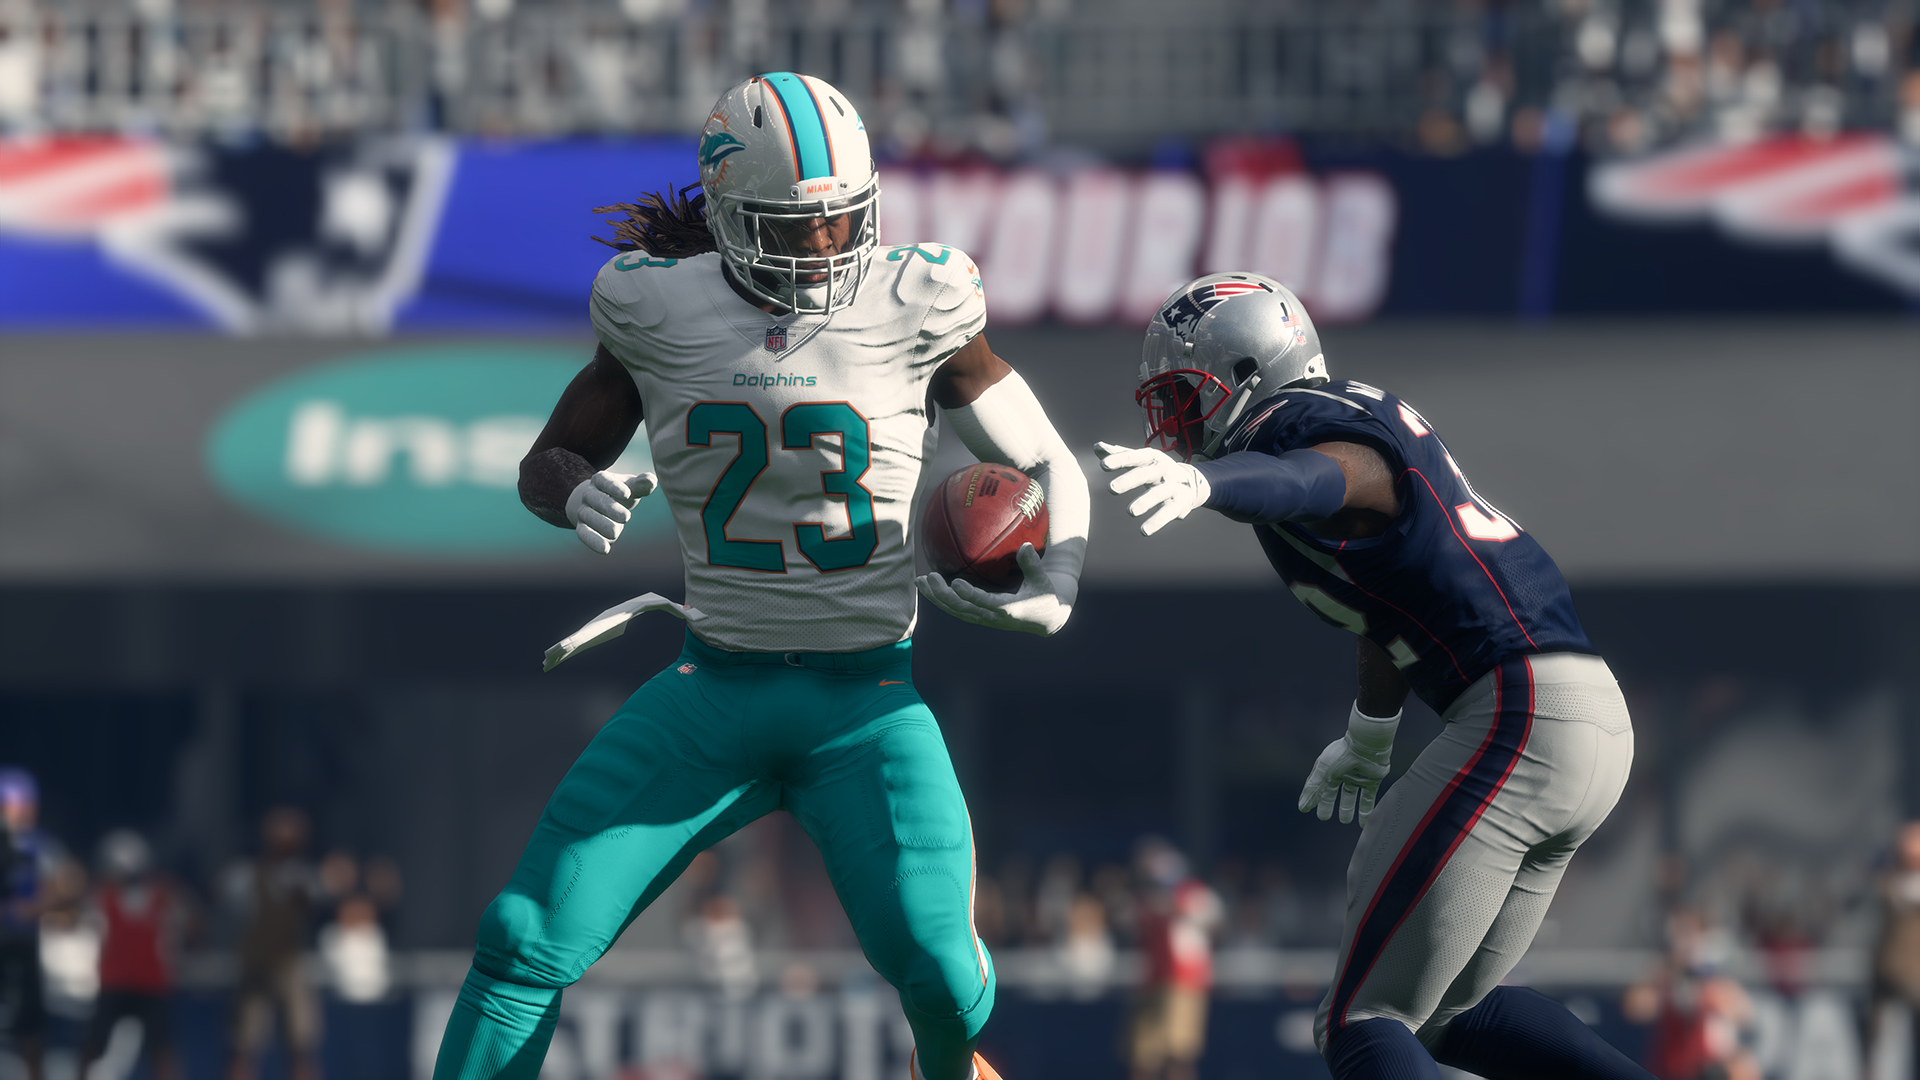 Madden NFL 18' to introduce story mode, feature new play styles